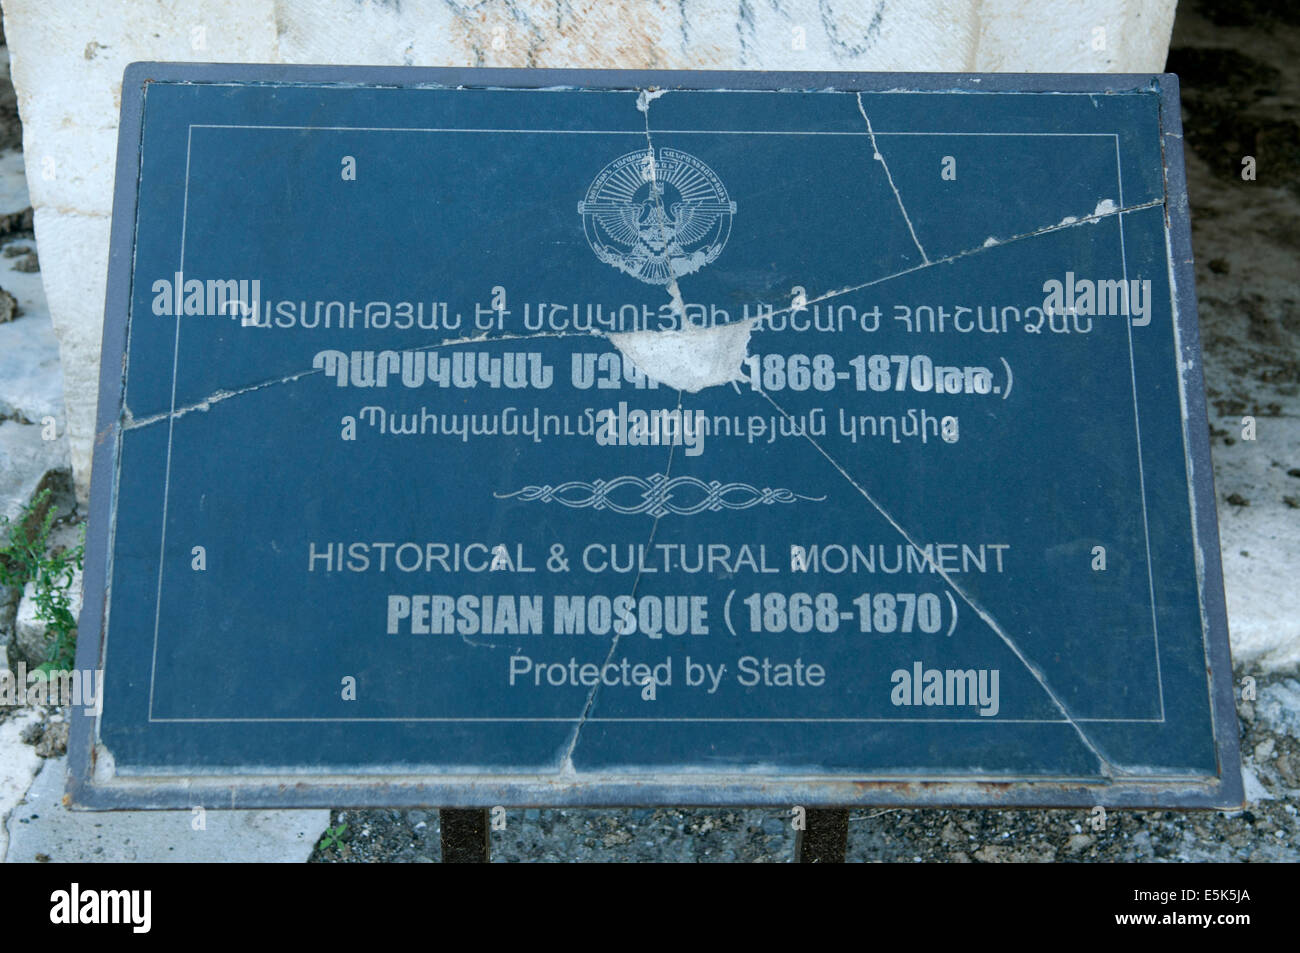 Plaque of abandoned ancient Persian Mosque, Agdam ghost town, unrecognized state of Nagorno-Karabakh Stock Photo